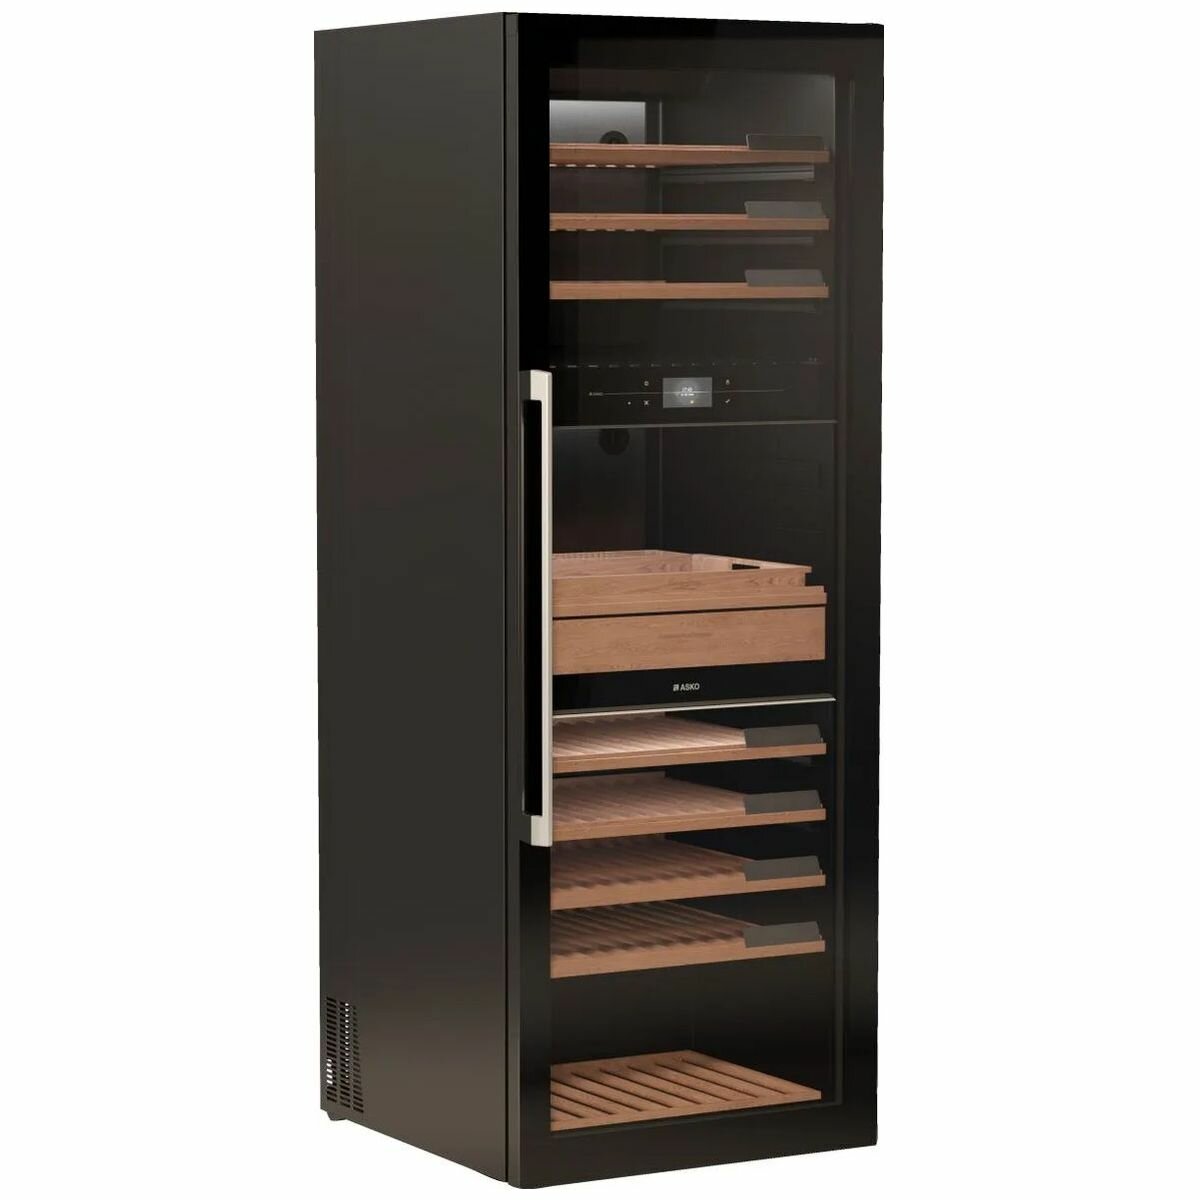 Asko 189 Bottle Triple Zone Wine Climate Cabinet Angled View